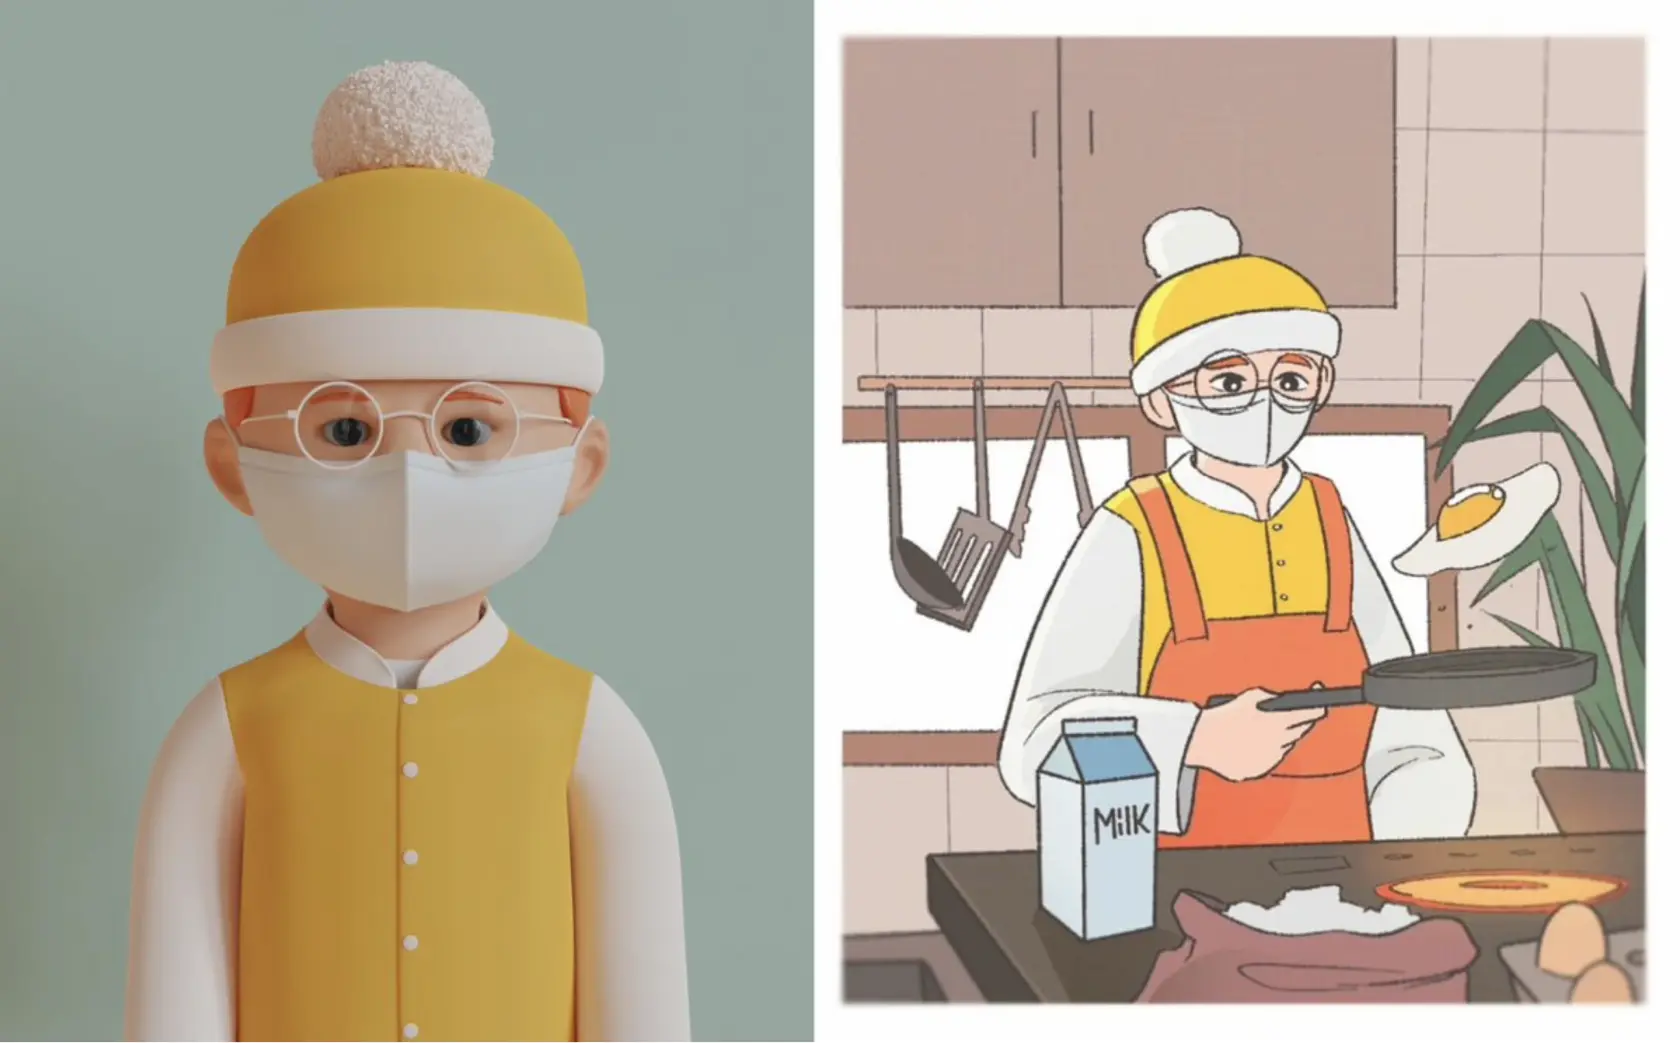 Illustration of a character in yellow headwear and glasses wearing a white mask; second illustration of same character flipping a pancake, with 'MILK' carton on counter.